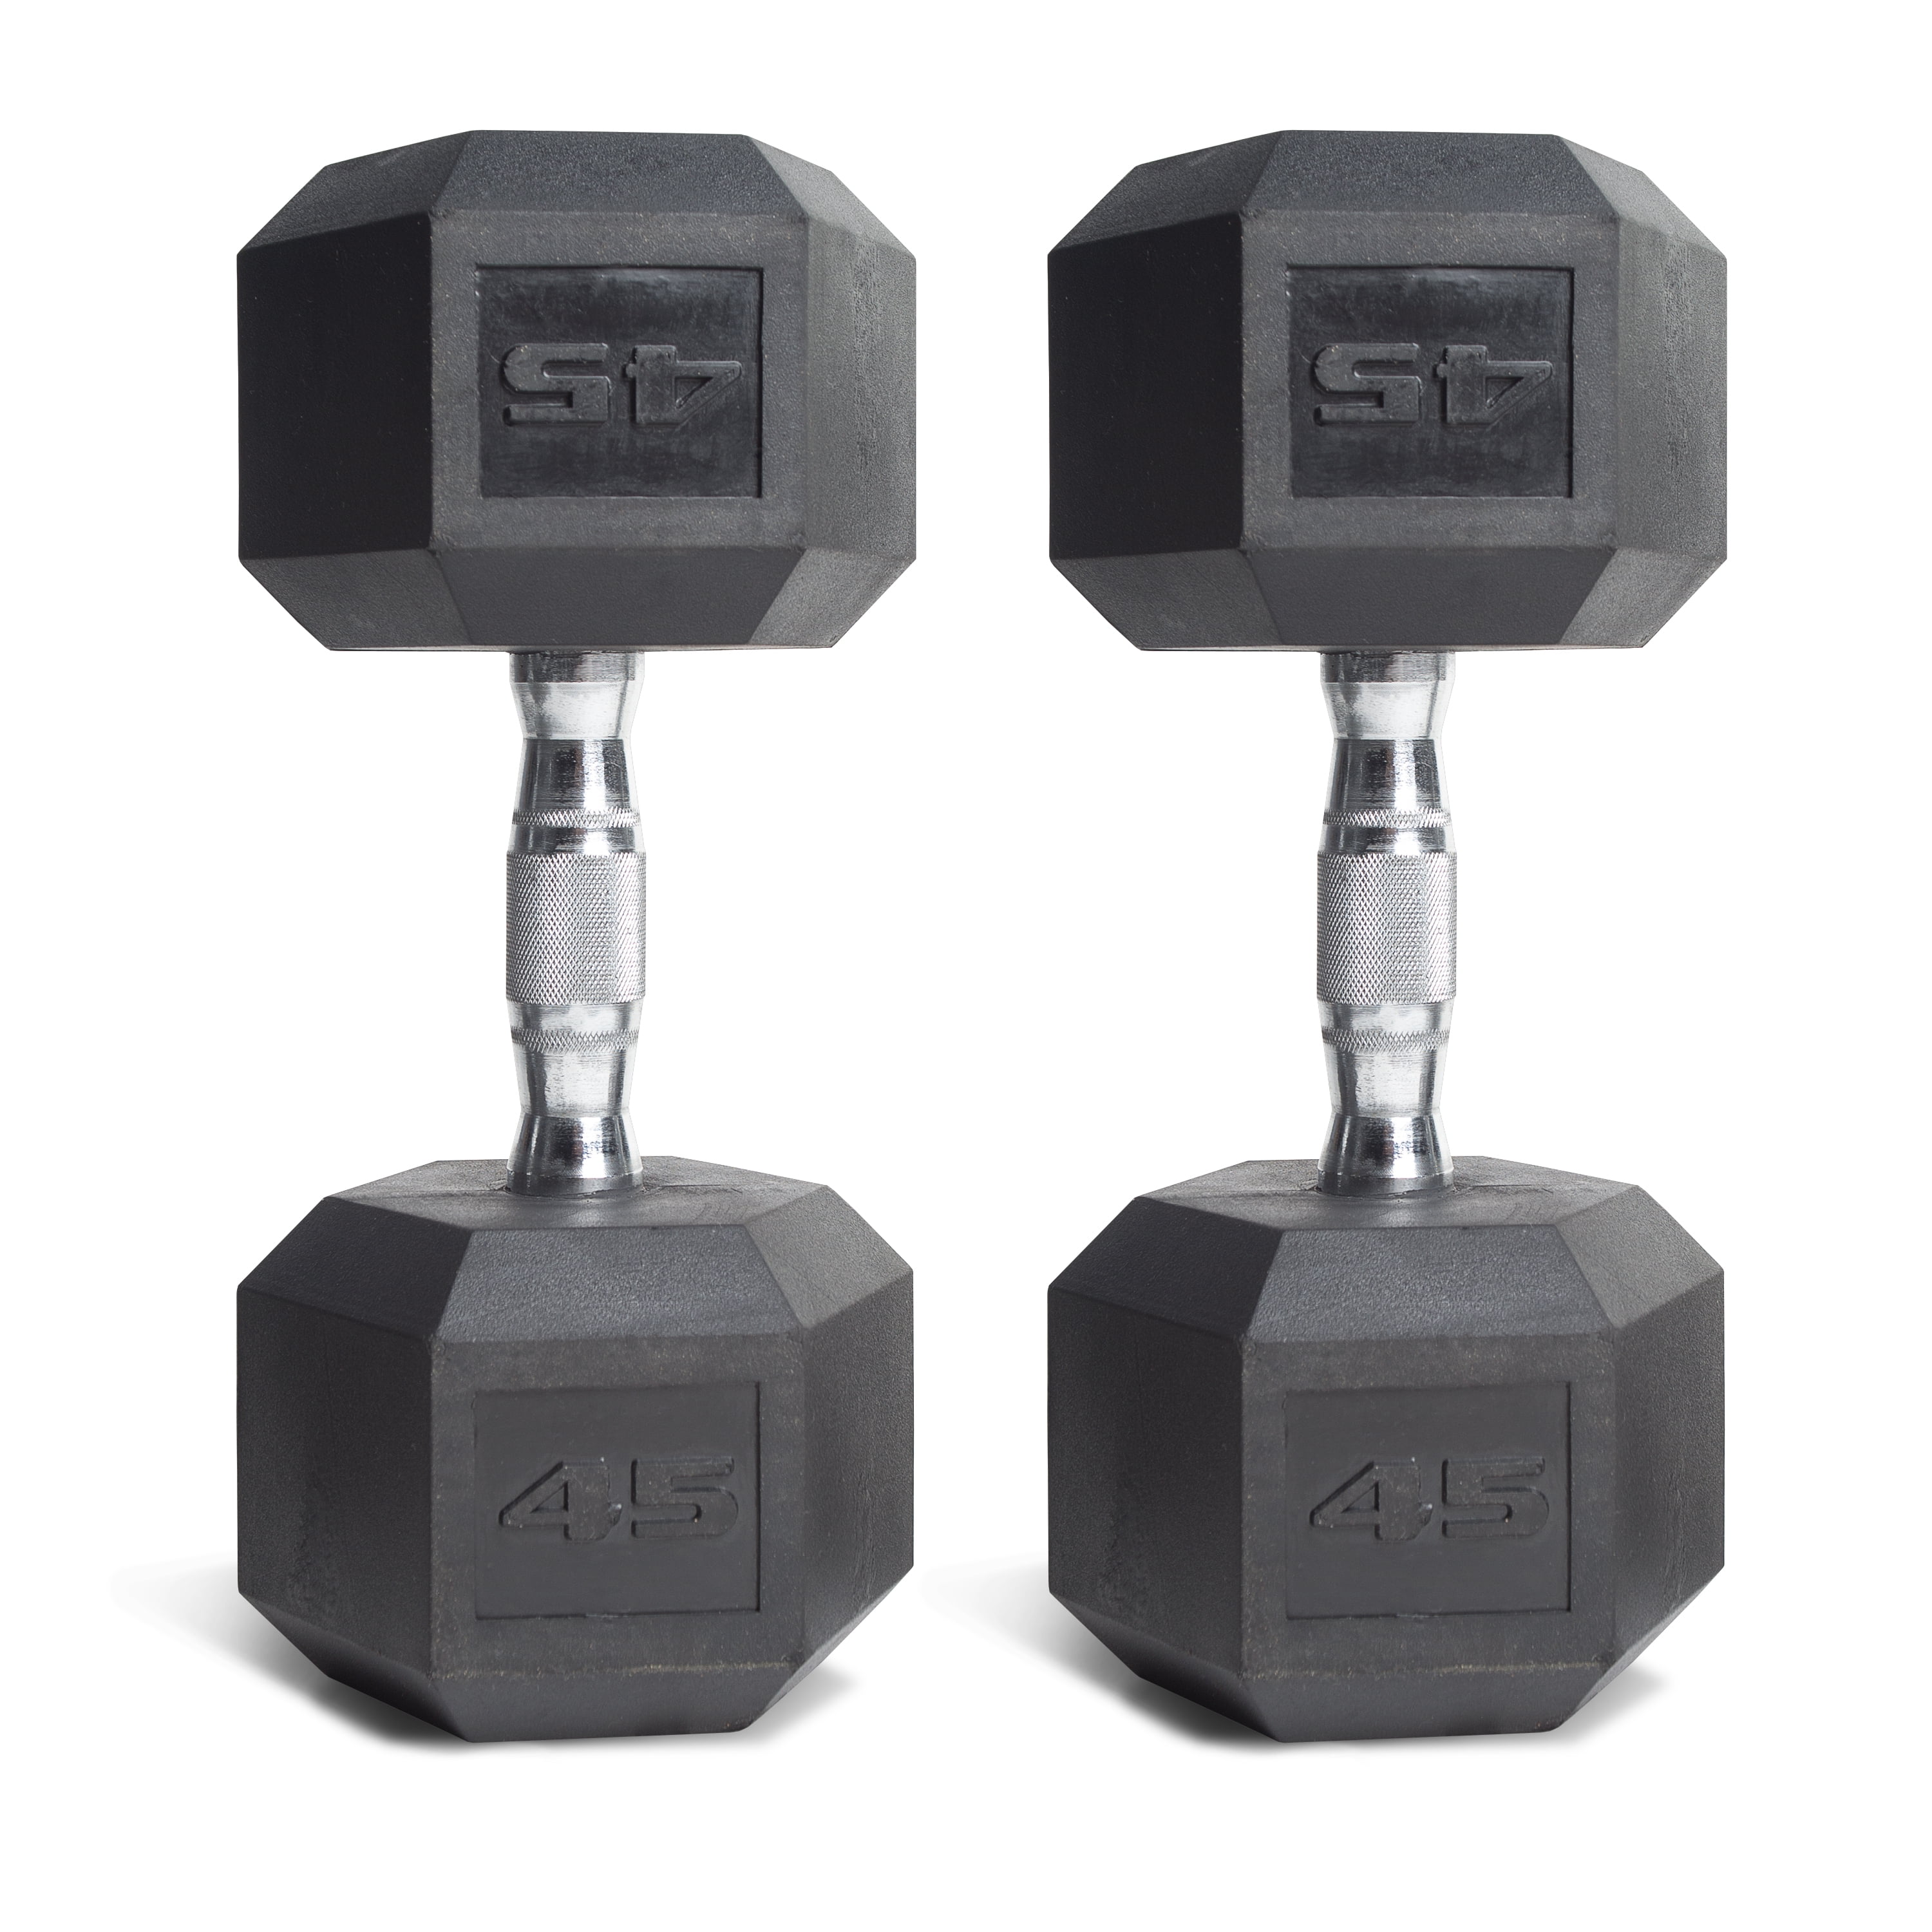 AmazonBasics 25LB DUMBBELL RUBBER COATED HEX WEIGHTS FREE PRIORITY MAIL SHIPPING 